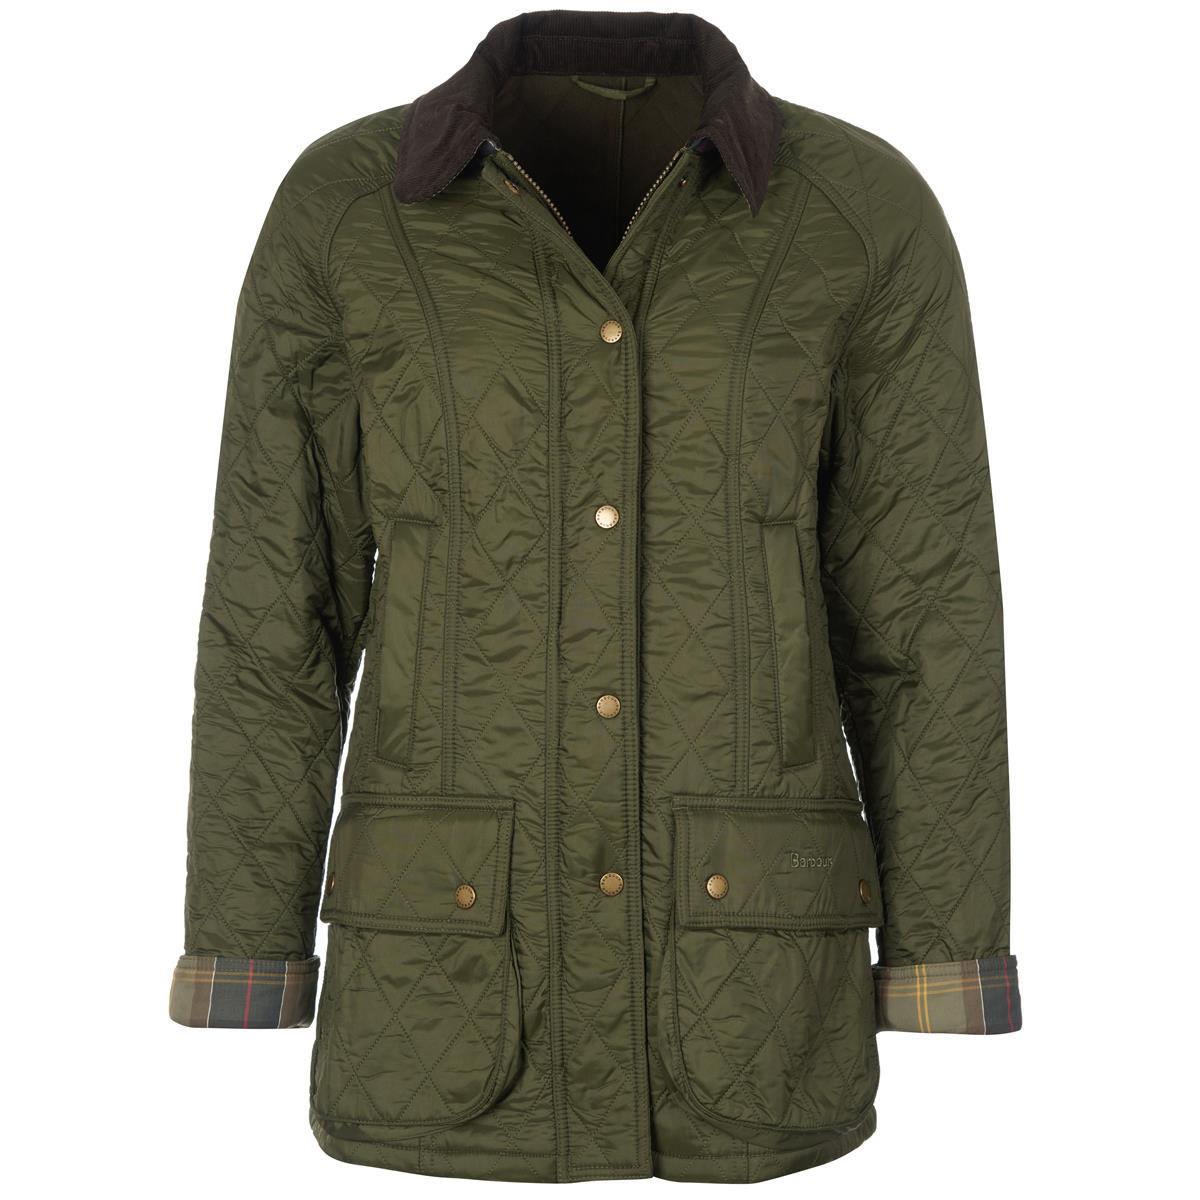 Does the Barbour Women's Beadnell Polarquilt Jacket have the check undercollar and cuffs?